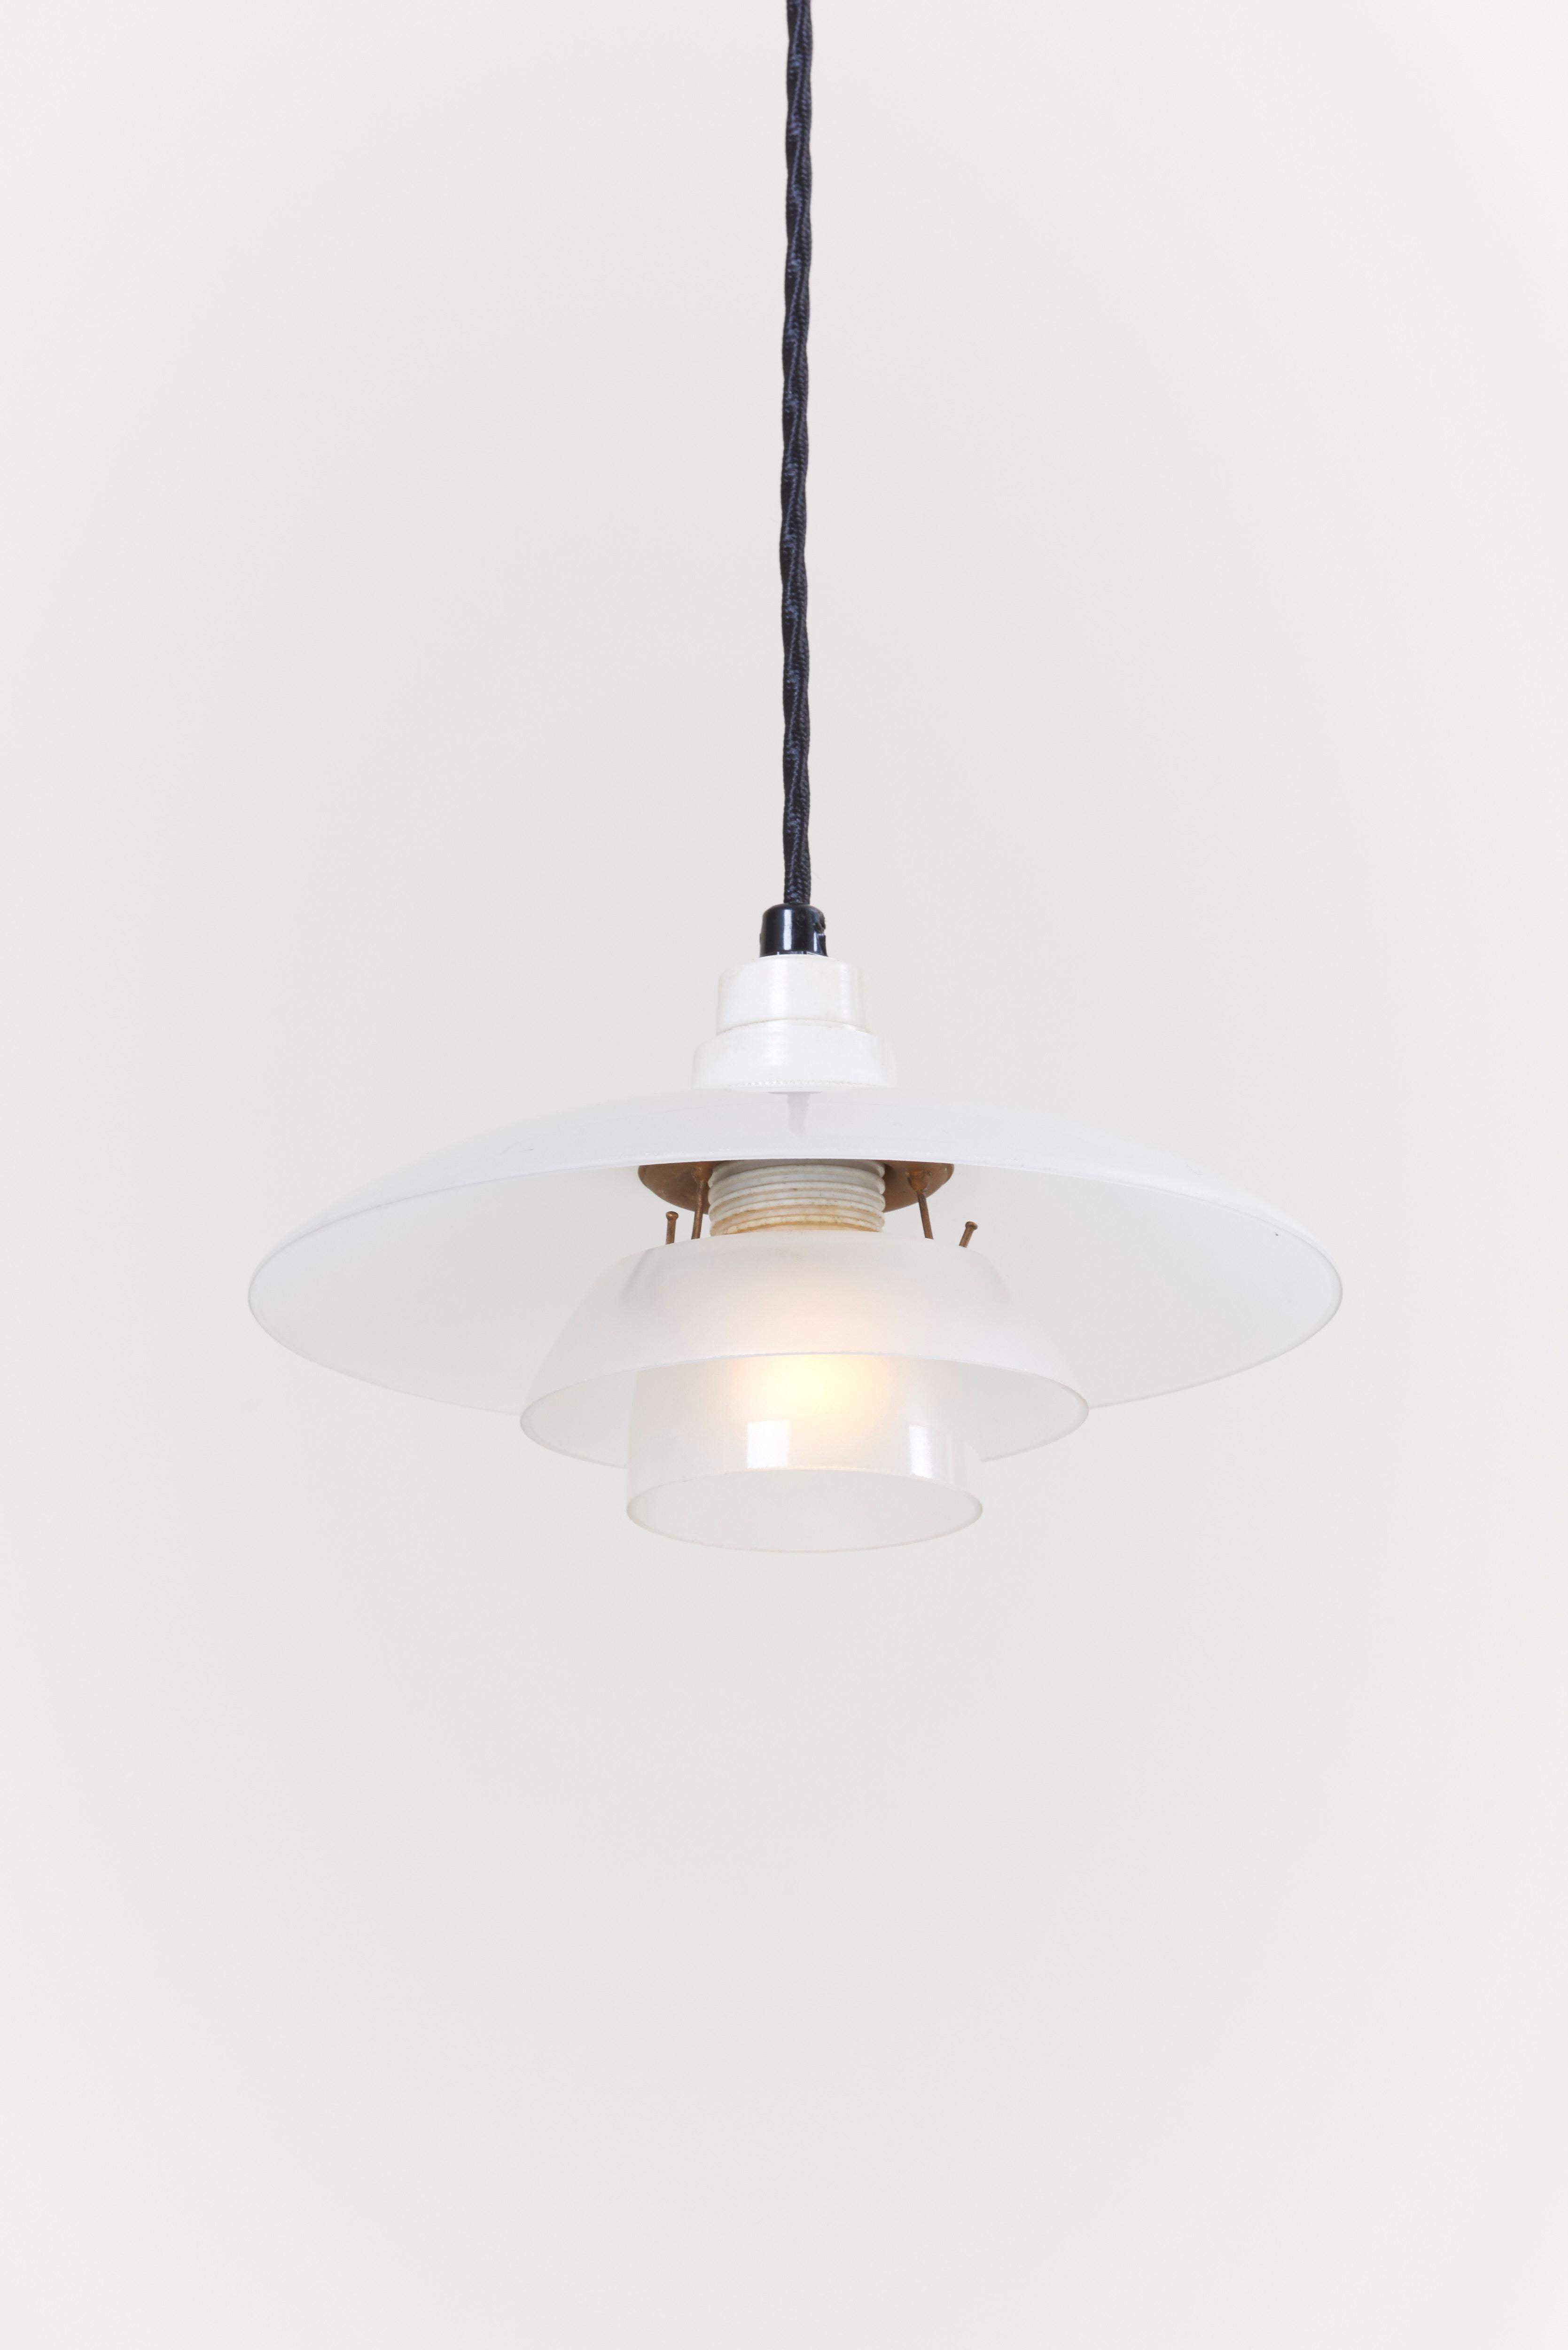 Mid-Century Modern One of Two early Poul Henningsen PH 1-/1 pendant Lamps for Louis Poulsen